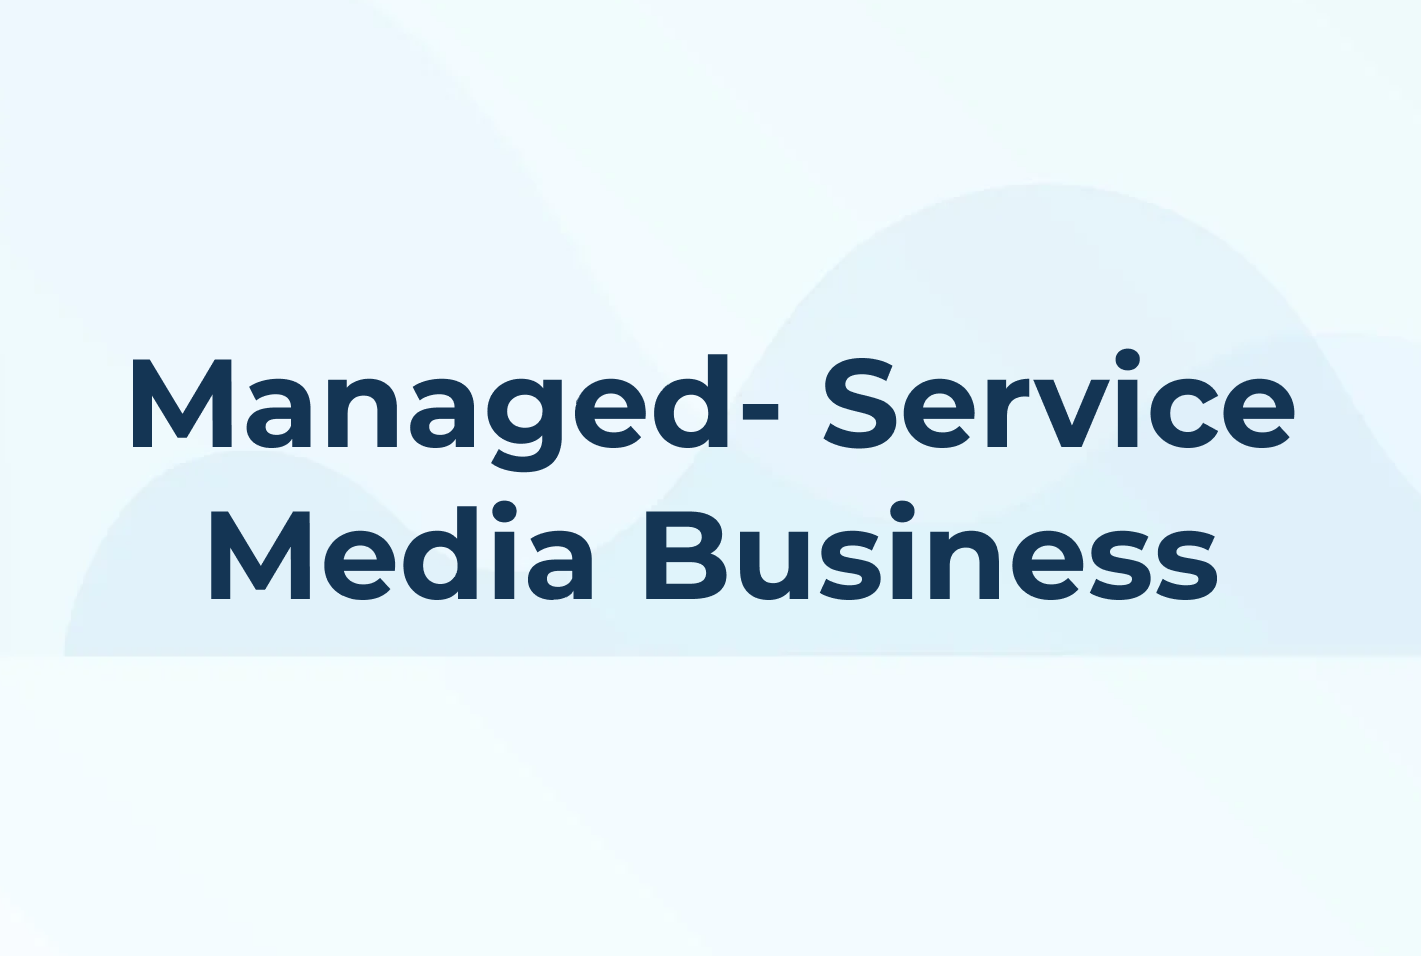 How to Start and Scale a Managed Service Media Business